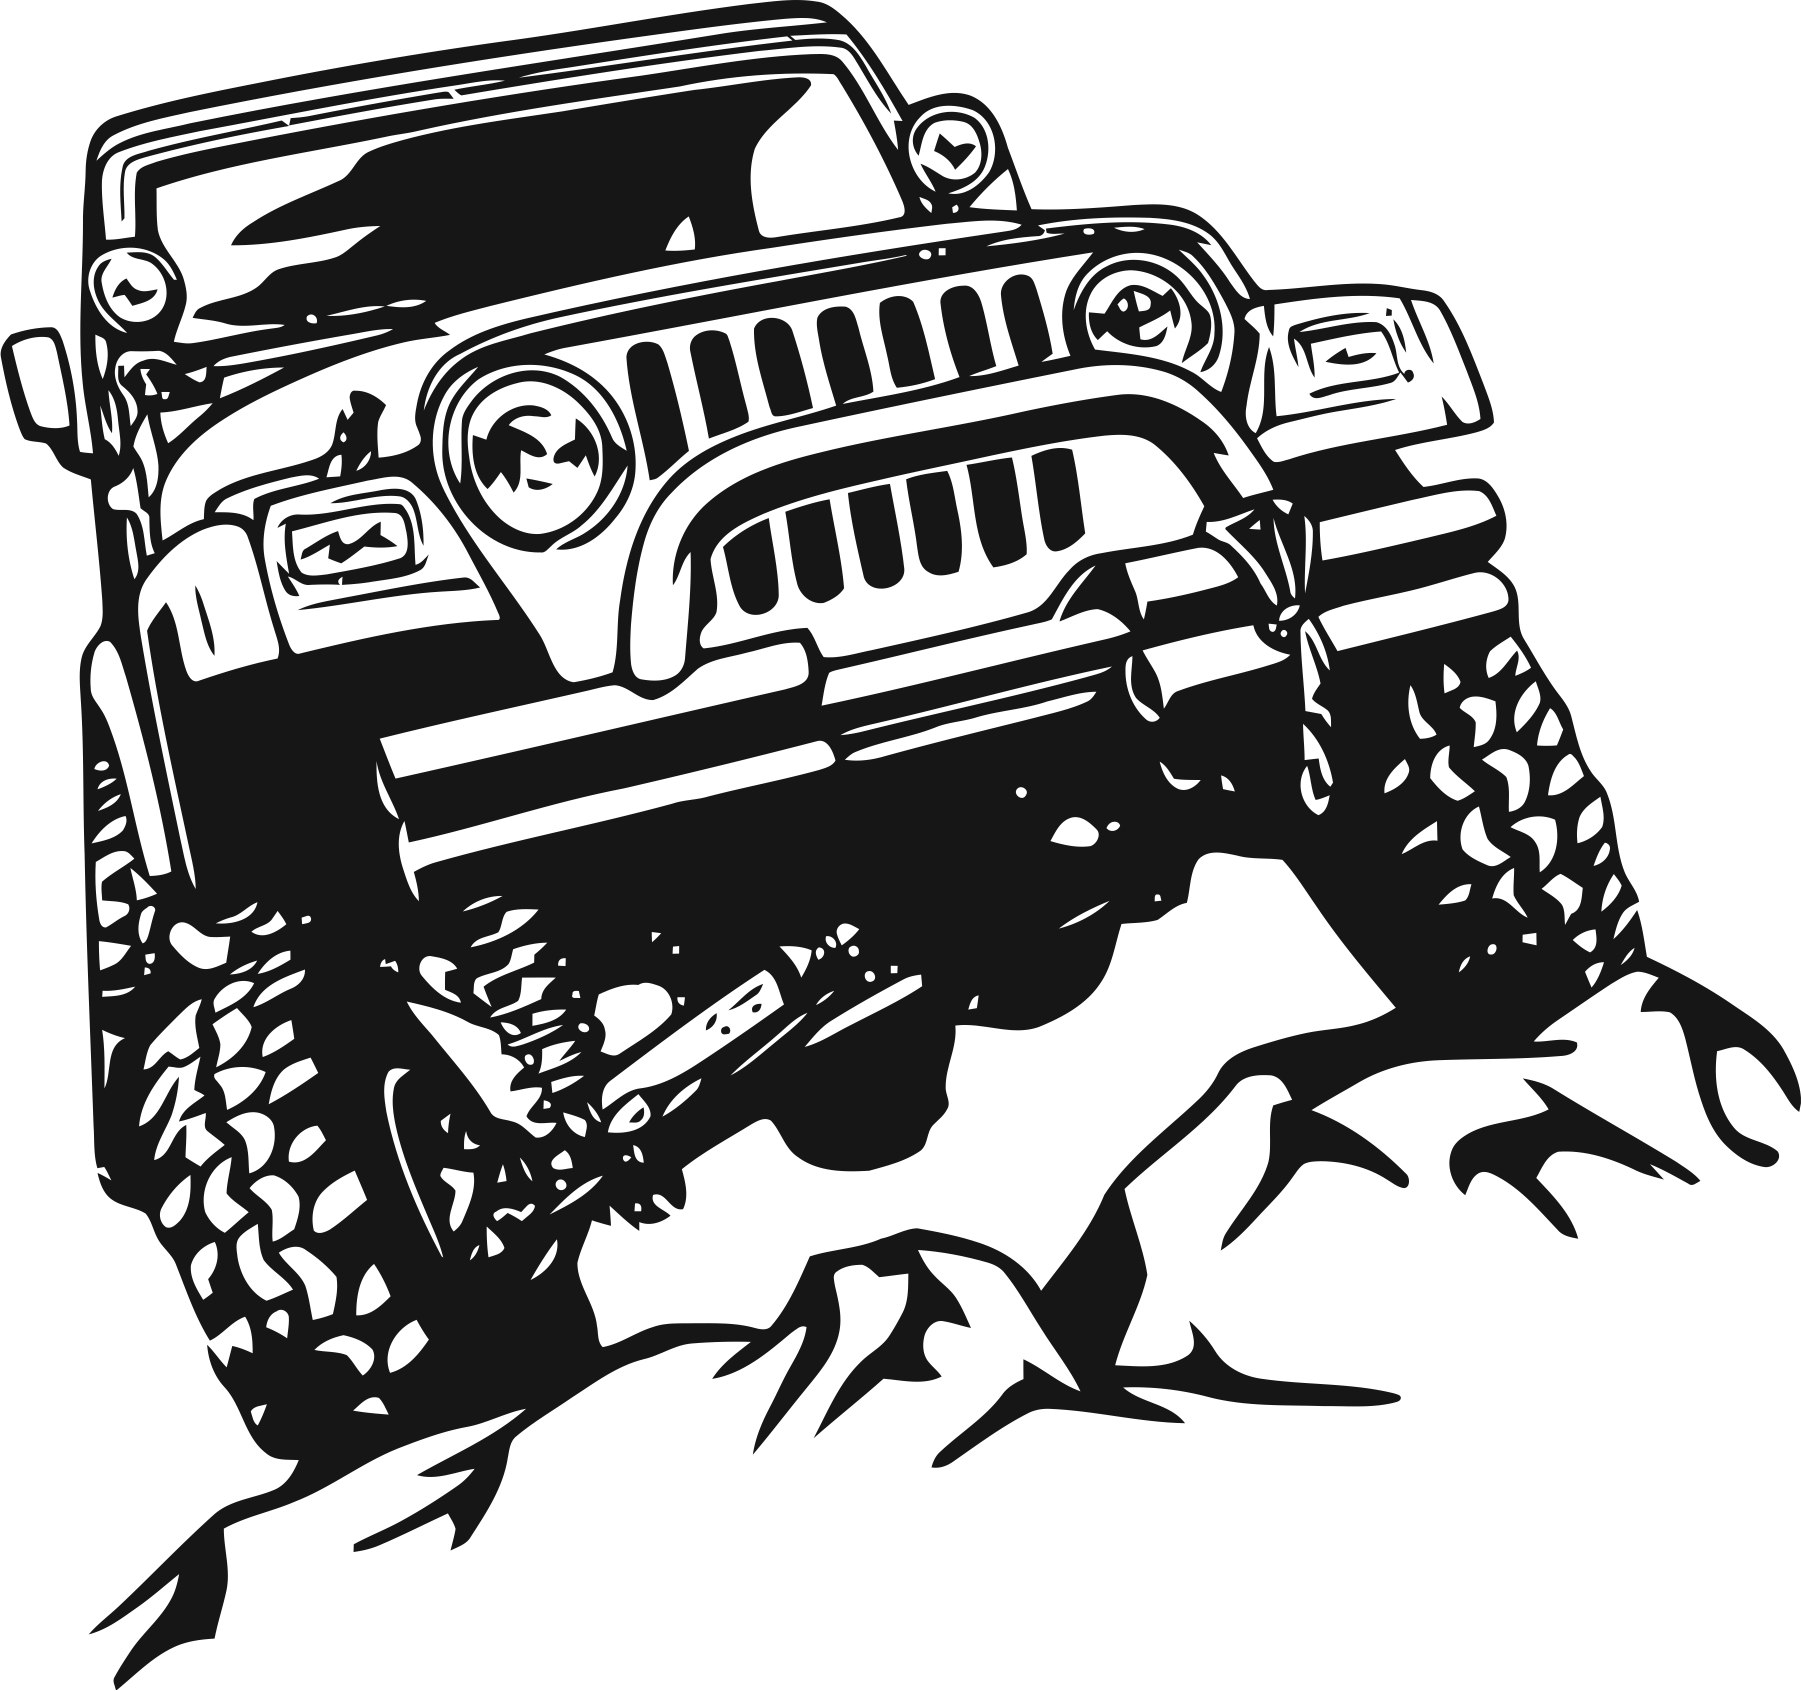 Offroad Sticker Free Vector cdr Download - 3axis.co